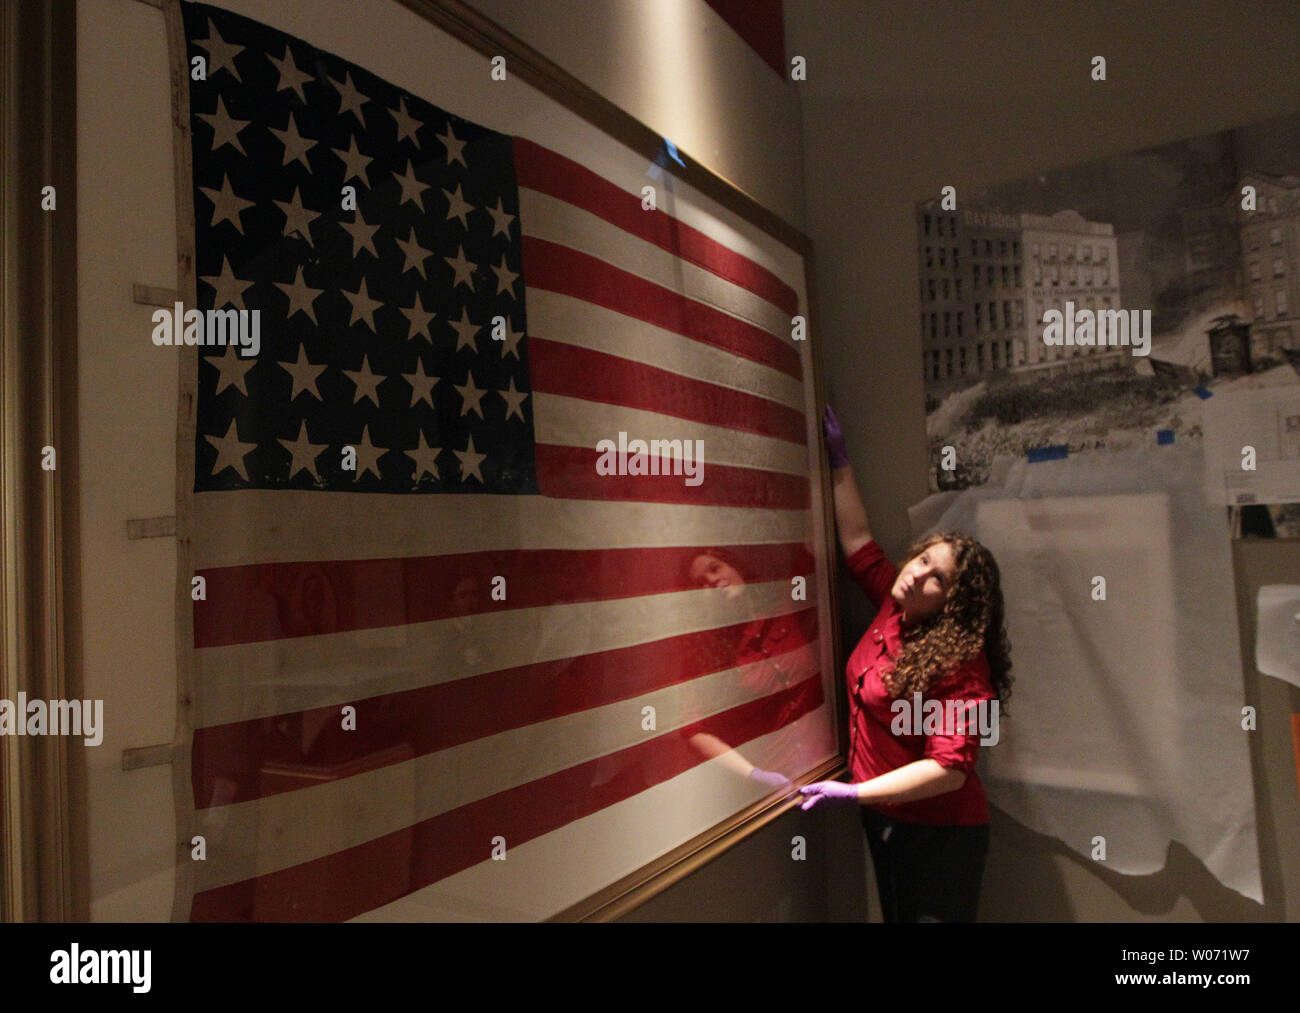 Catlin Carter a Conservation Lab Technician at the Missouri History Museum straightens a 34 star American flag from the Civil War era as the 'Civil War in Missouri,' display continues to set up at the Museum in St. Louis on November 8, 2011. To commemorate the sesquicentennial of the Civil War the Missouri History MuseumÕs comprehensive The Civil War in Missouri will feature items from America's bloodiest conflict. UPI/Bill Greenblatt Stock Photo